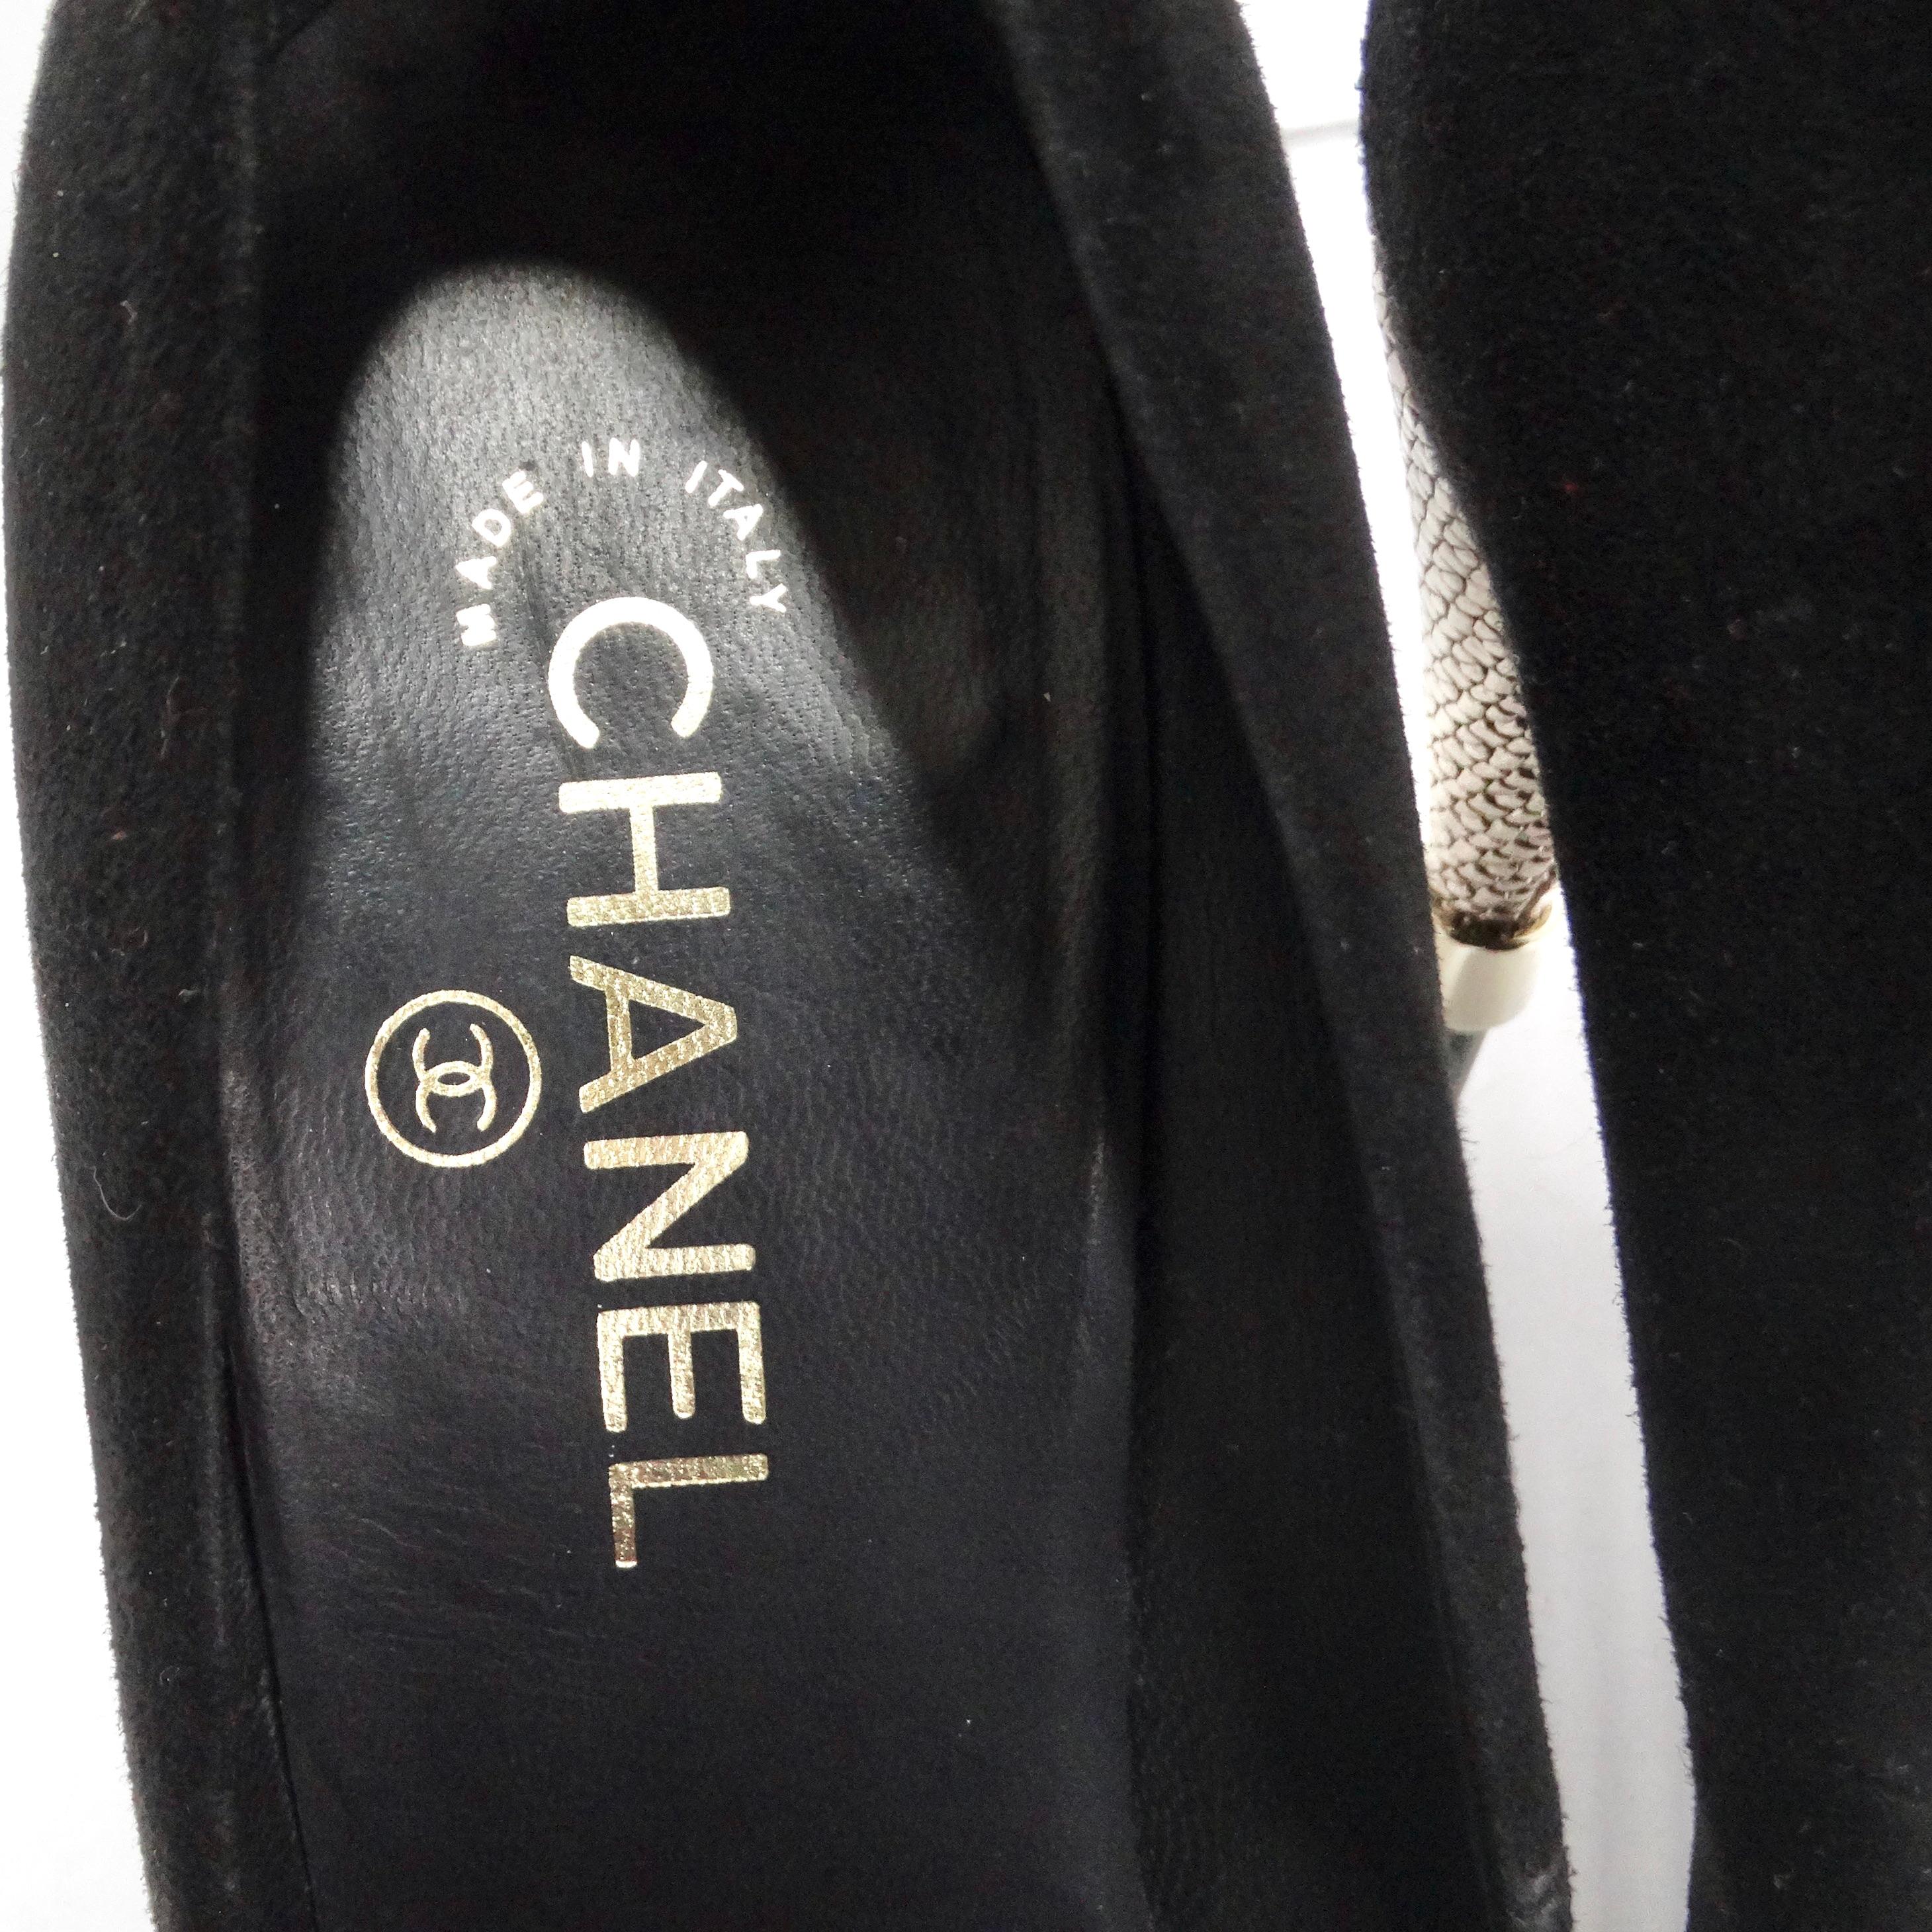 Chanel 2016 Suede Pumps In Excellent Condition For Sale In Scottsdale, AZ